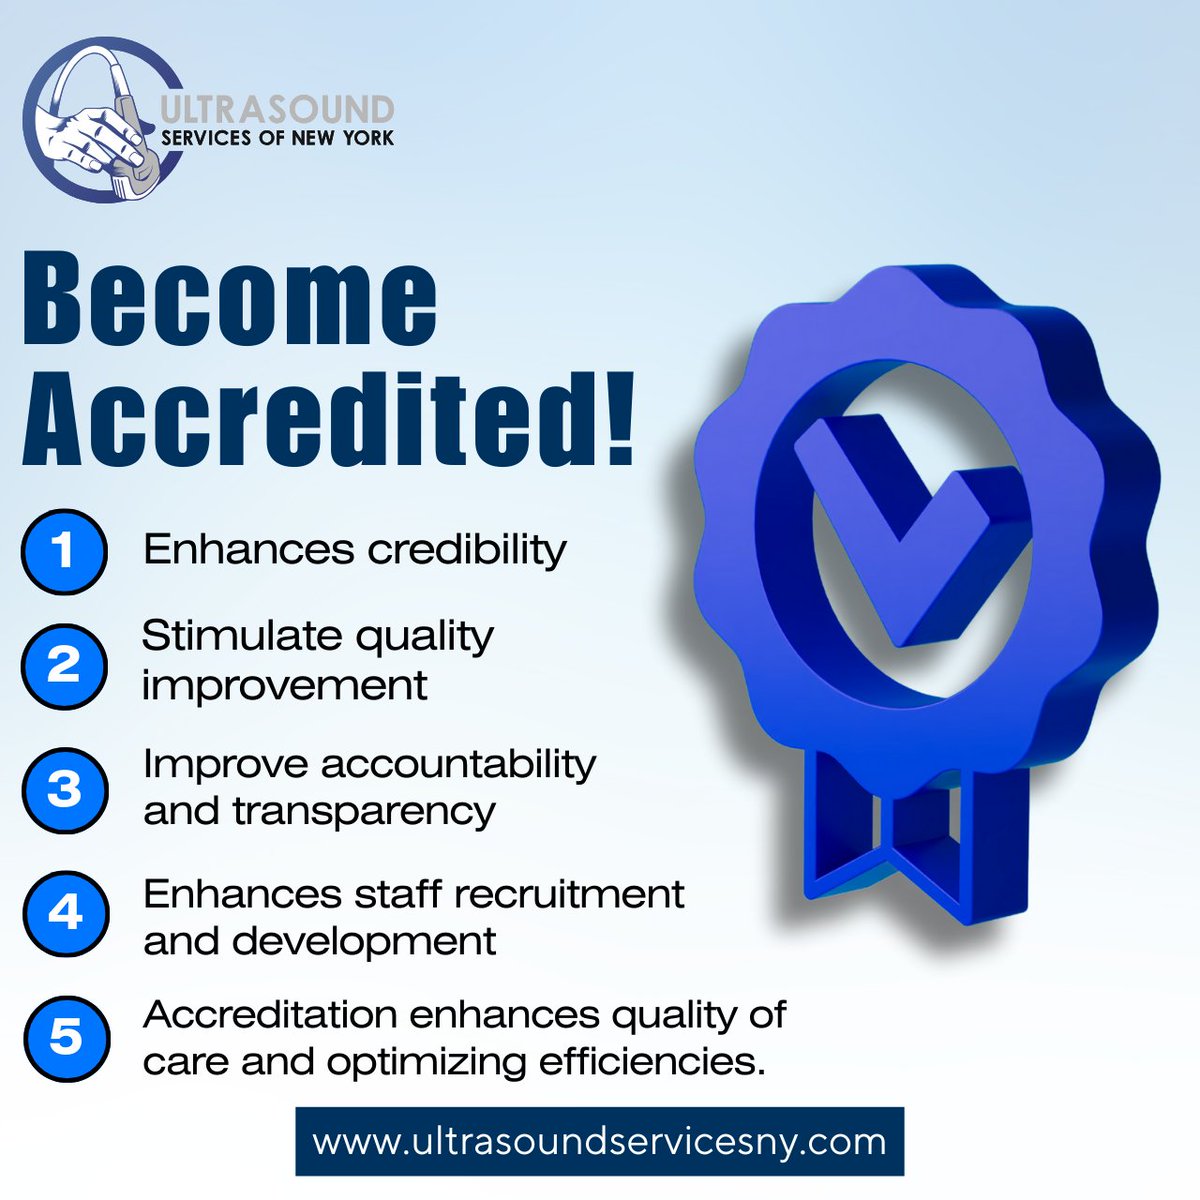 Ready to enhance your facility's quality of care and credibility? Contact us at +1 516-326-7772

#Accreditation #AccreditationServices #AccreditationSuccess #HealthcareCareers #UltrasoundServicesAgency #AccreditationMatters #Healthcare #Satffing #USNY #Twitter #Trending #NewYork